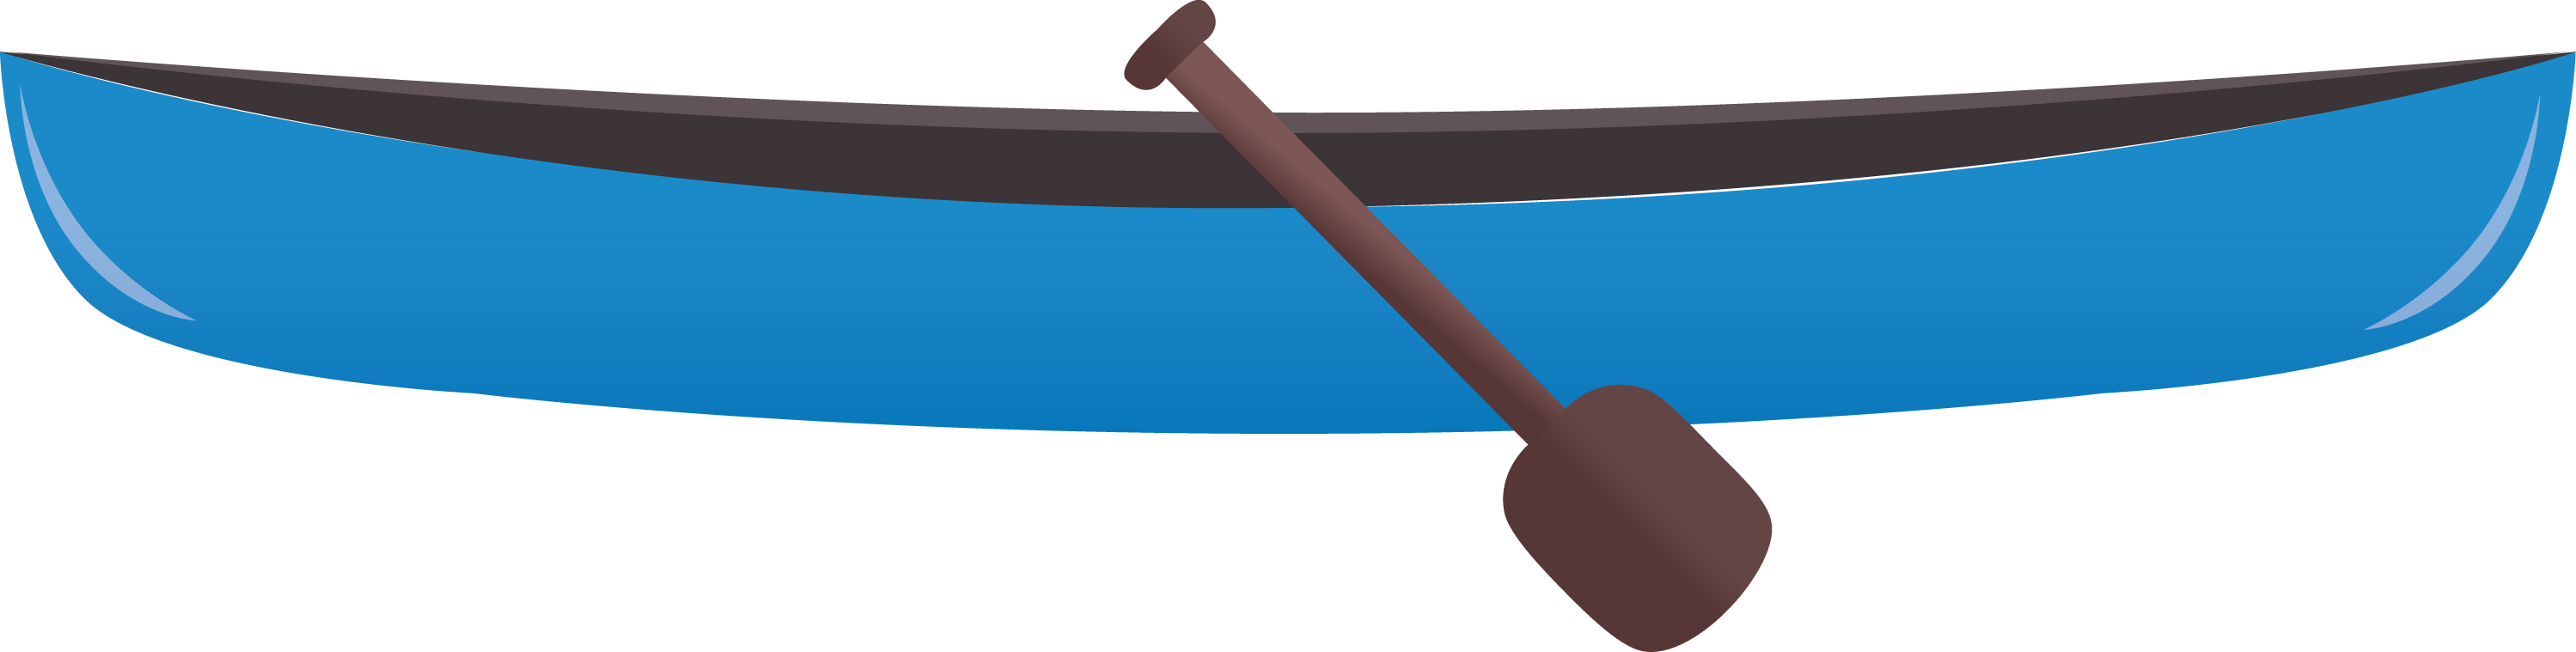 Vector Canoe Free PNG Image